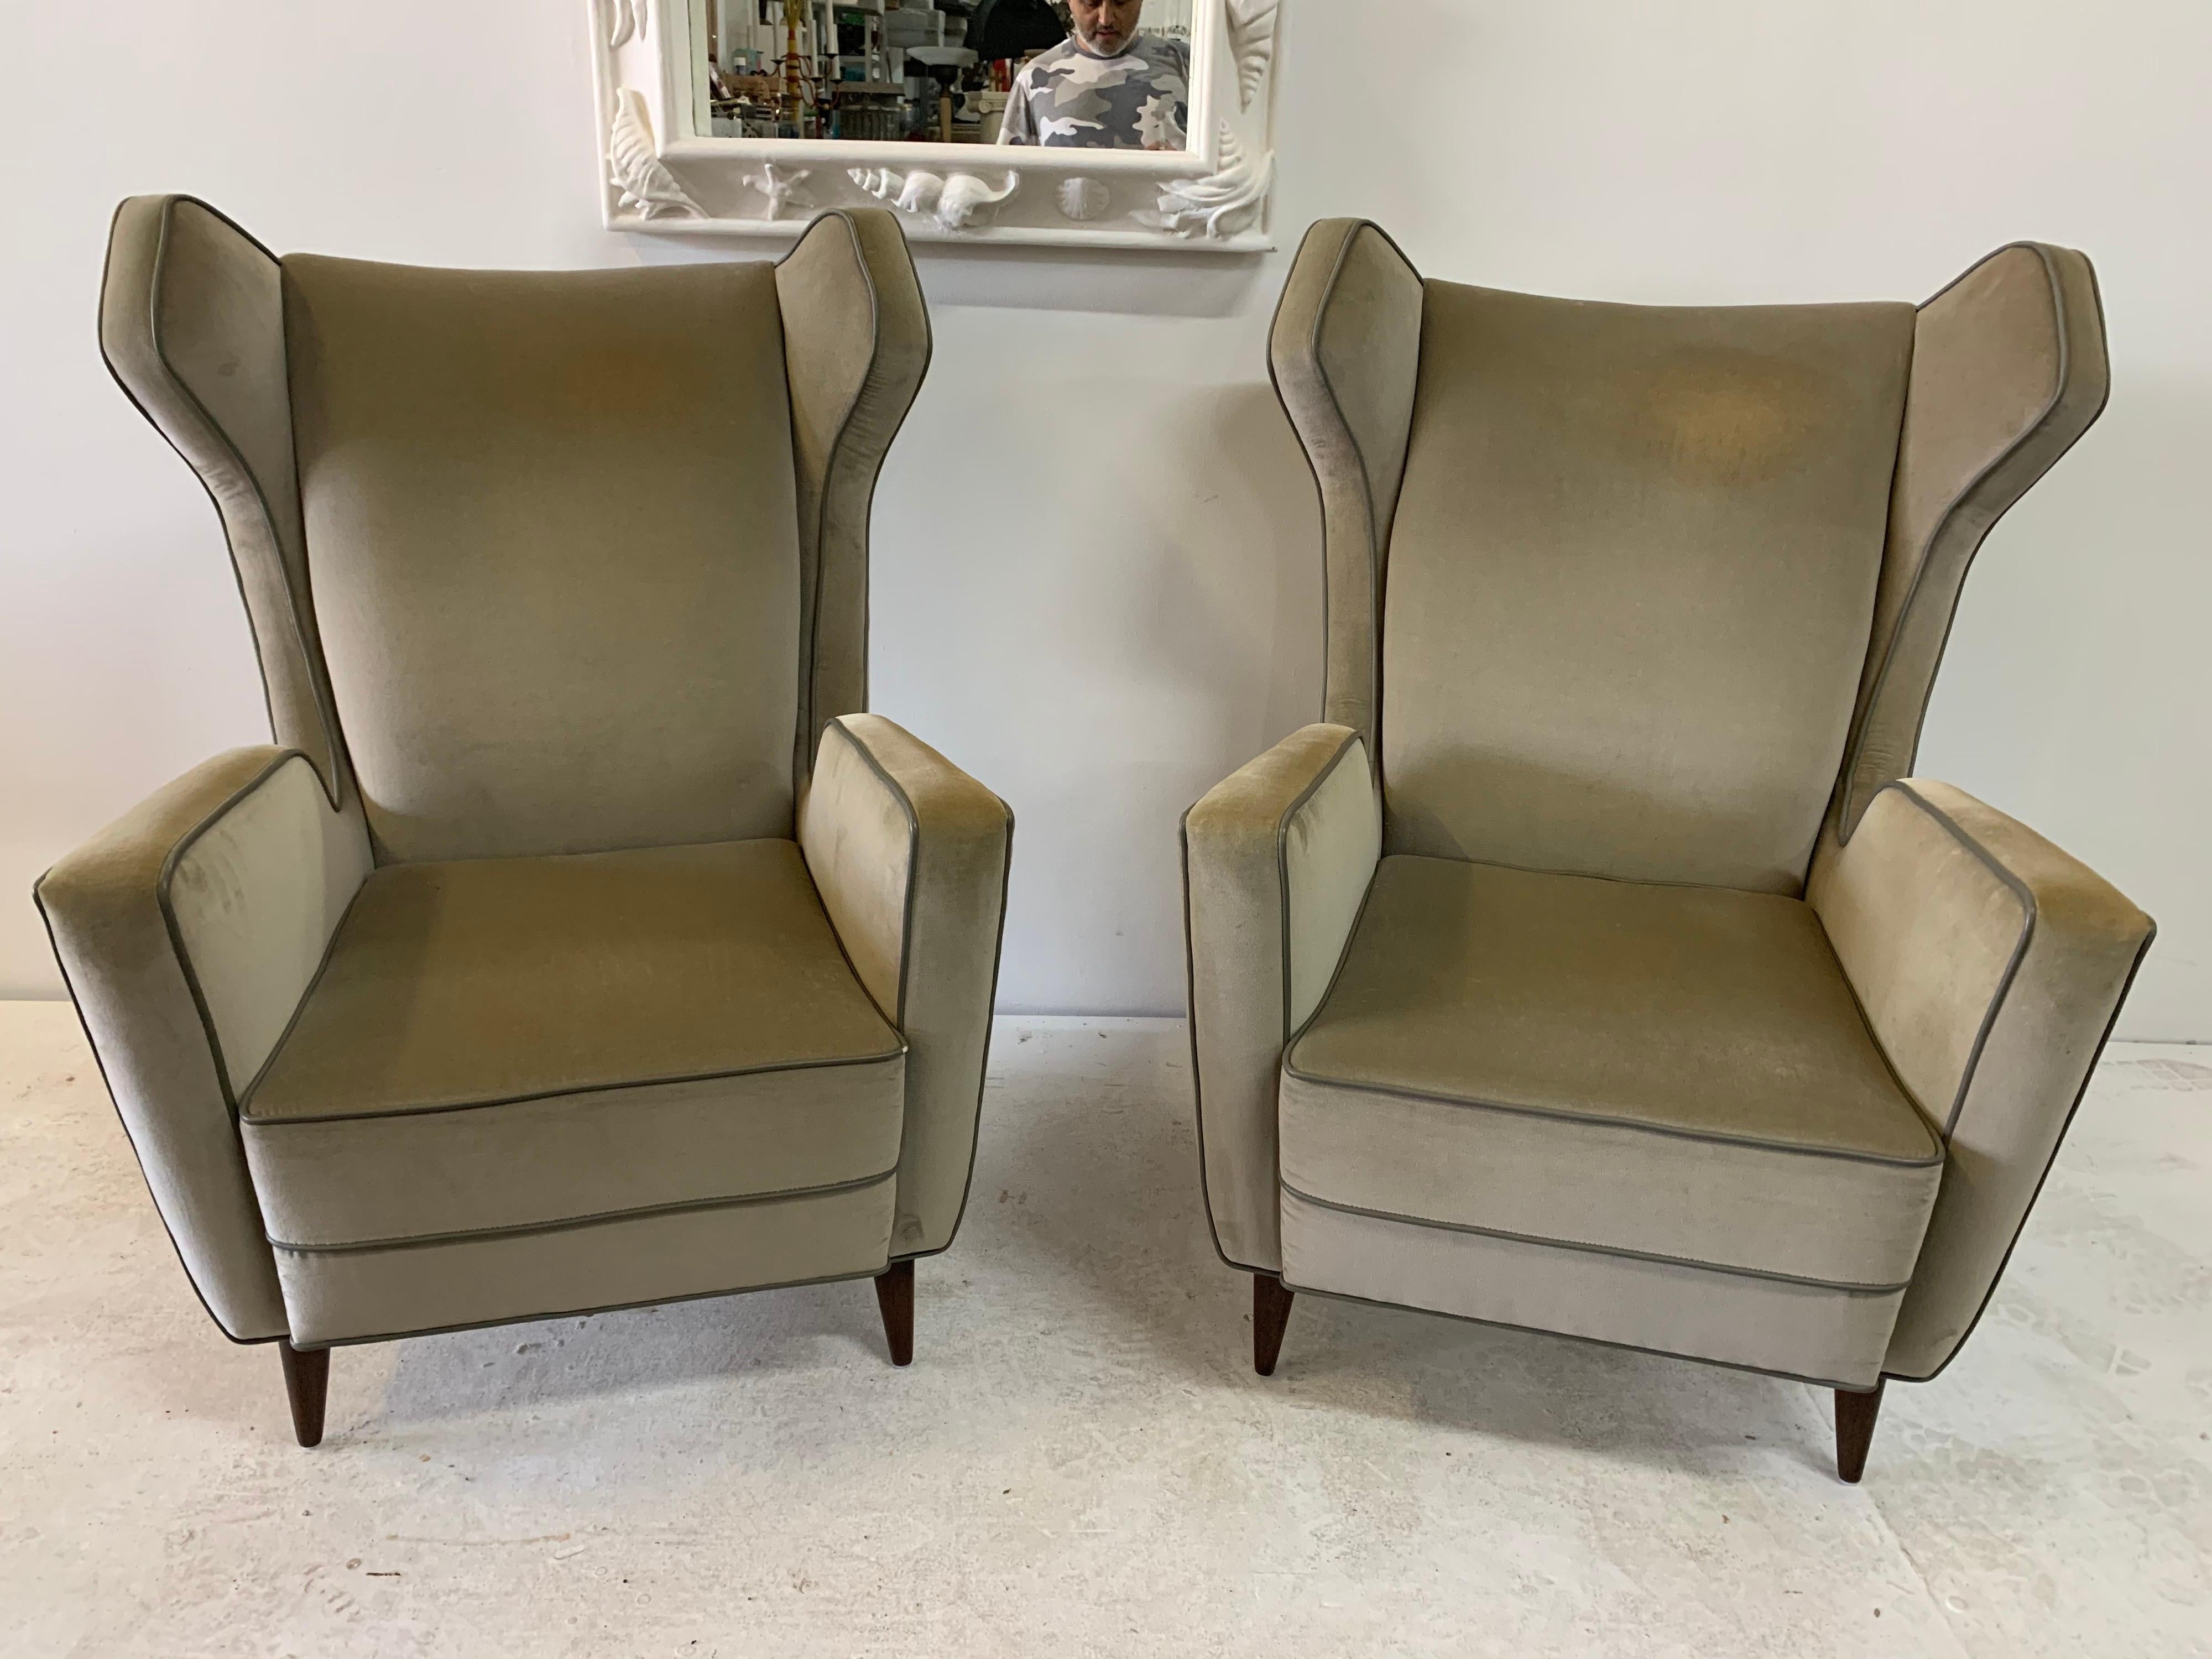 Really clean and defined lines, these armchairs with sculptural winged headrest and turned wood feet, are upholstered in a heather velvet with dark gray leather piping. Very comfortable. Note: We do have a professional upholstery service if you